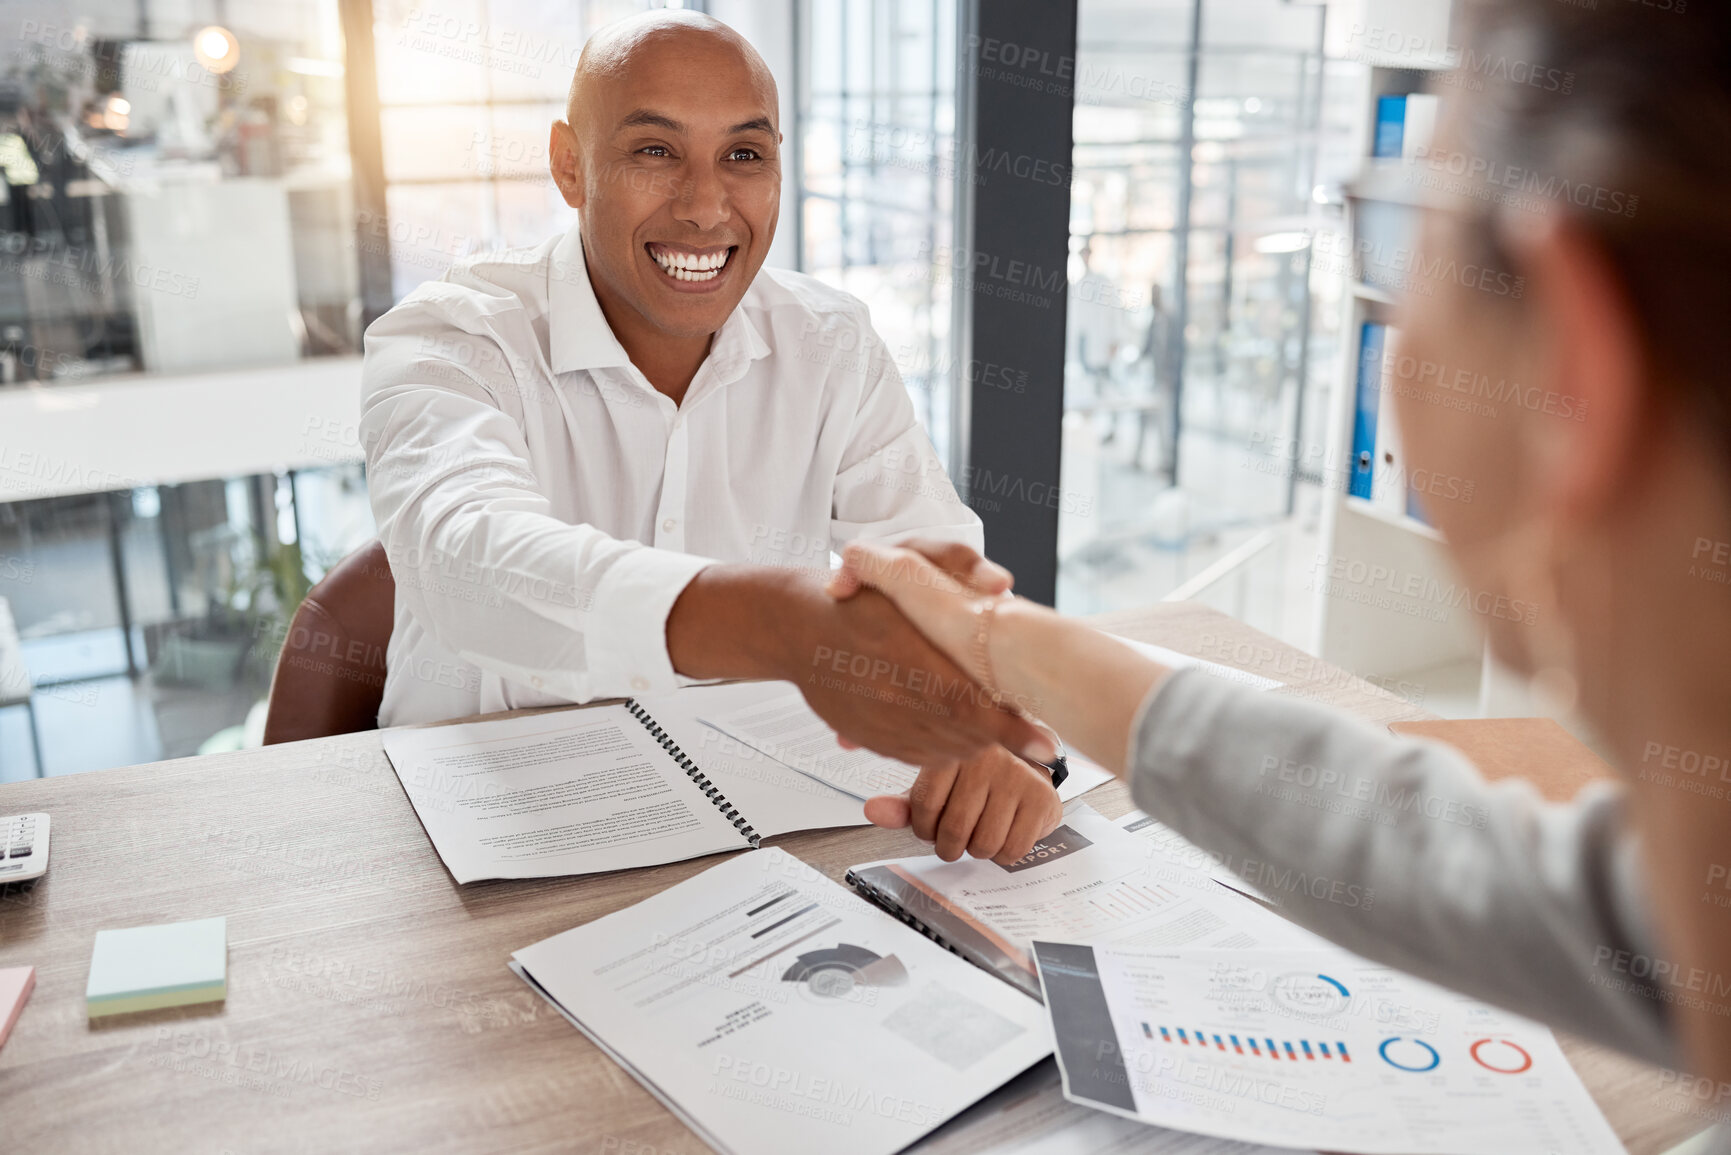 Buy stock photo Handshake, meeting and welcome with a business man and woman shaking hands in an office at work. Teamwork, thank you and partnership with a male and female employee working together in agreement